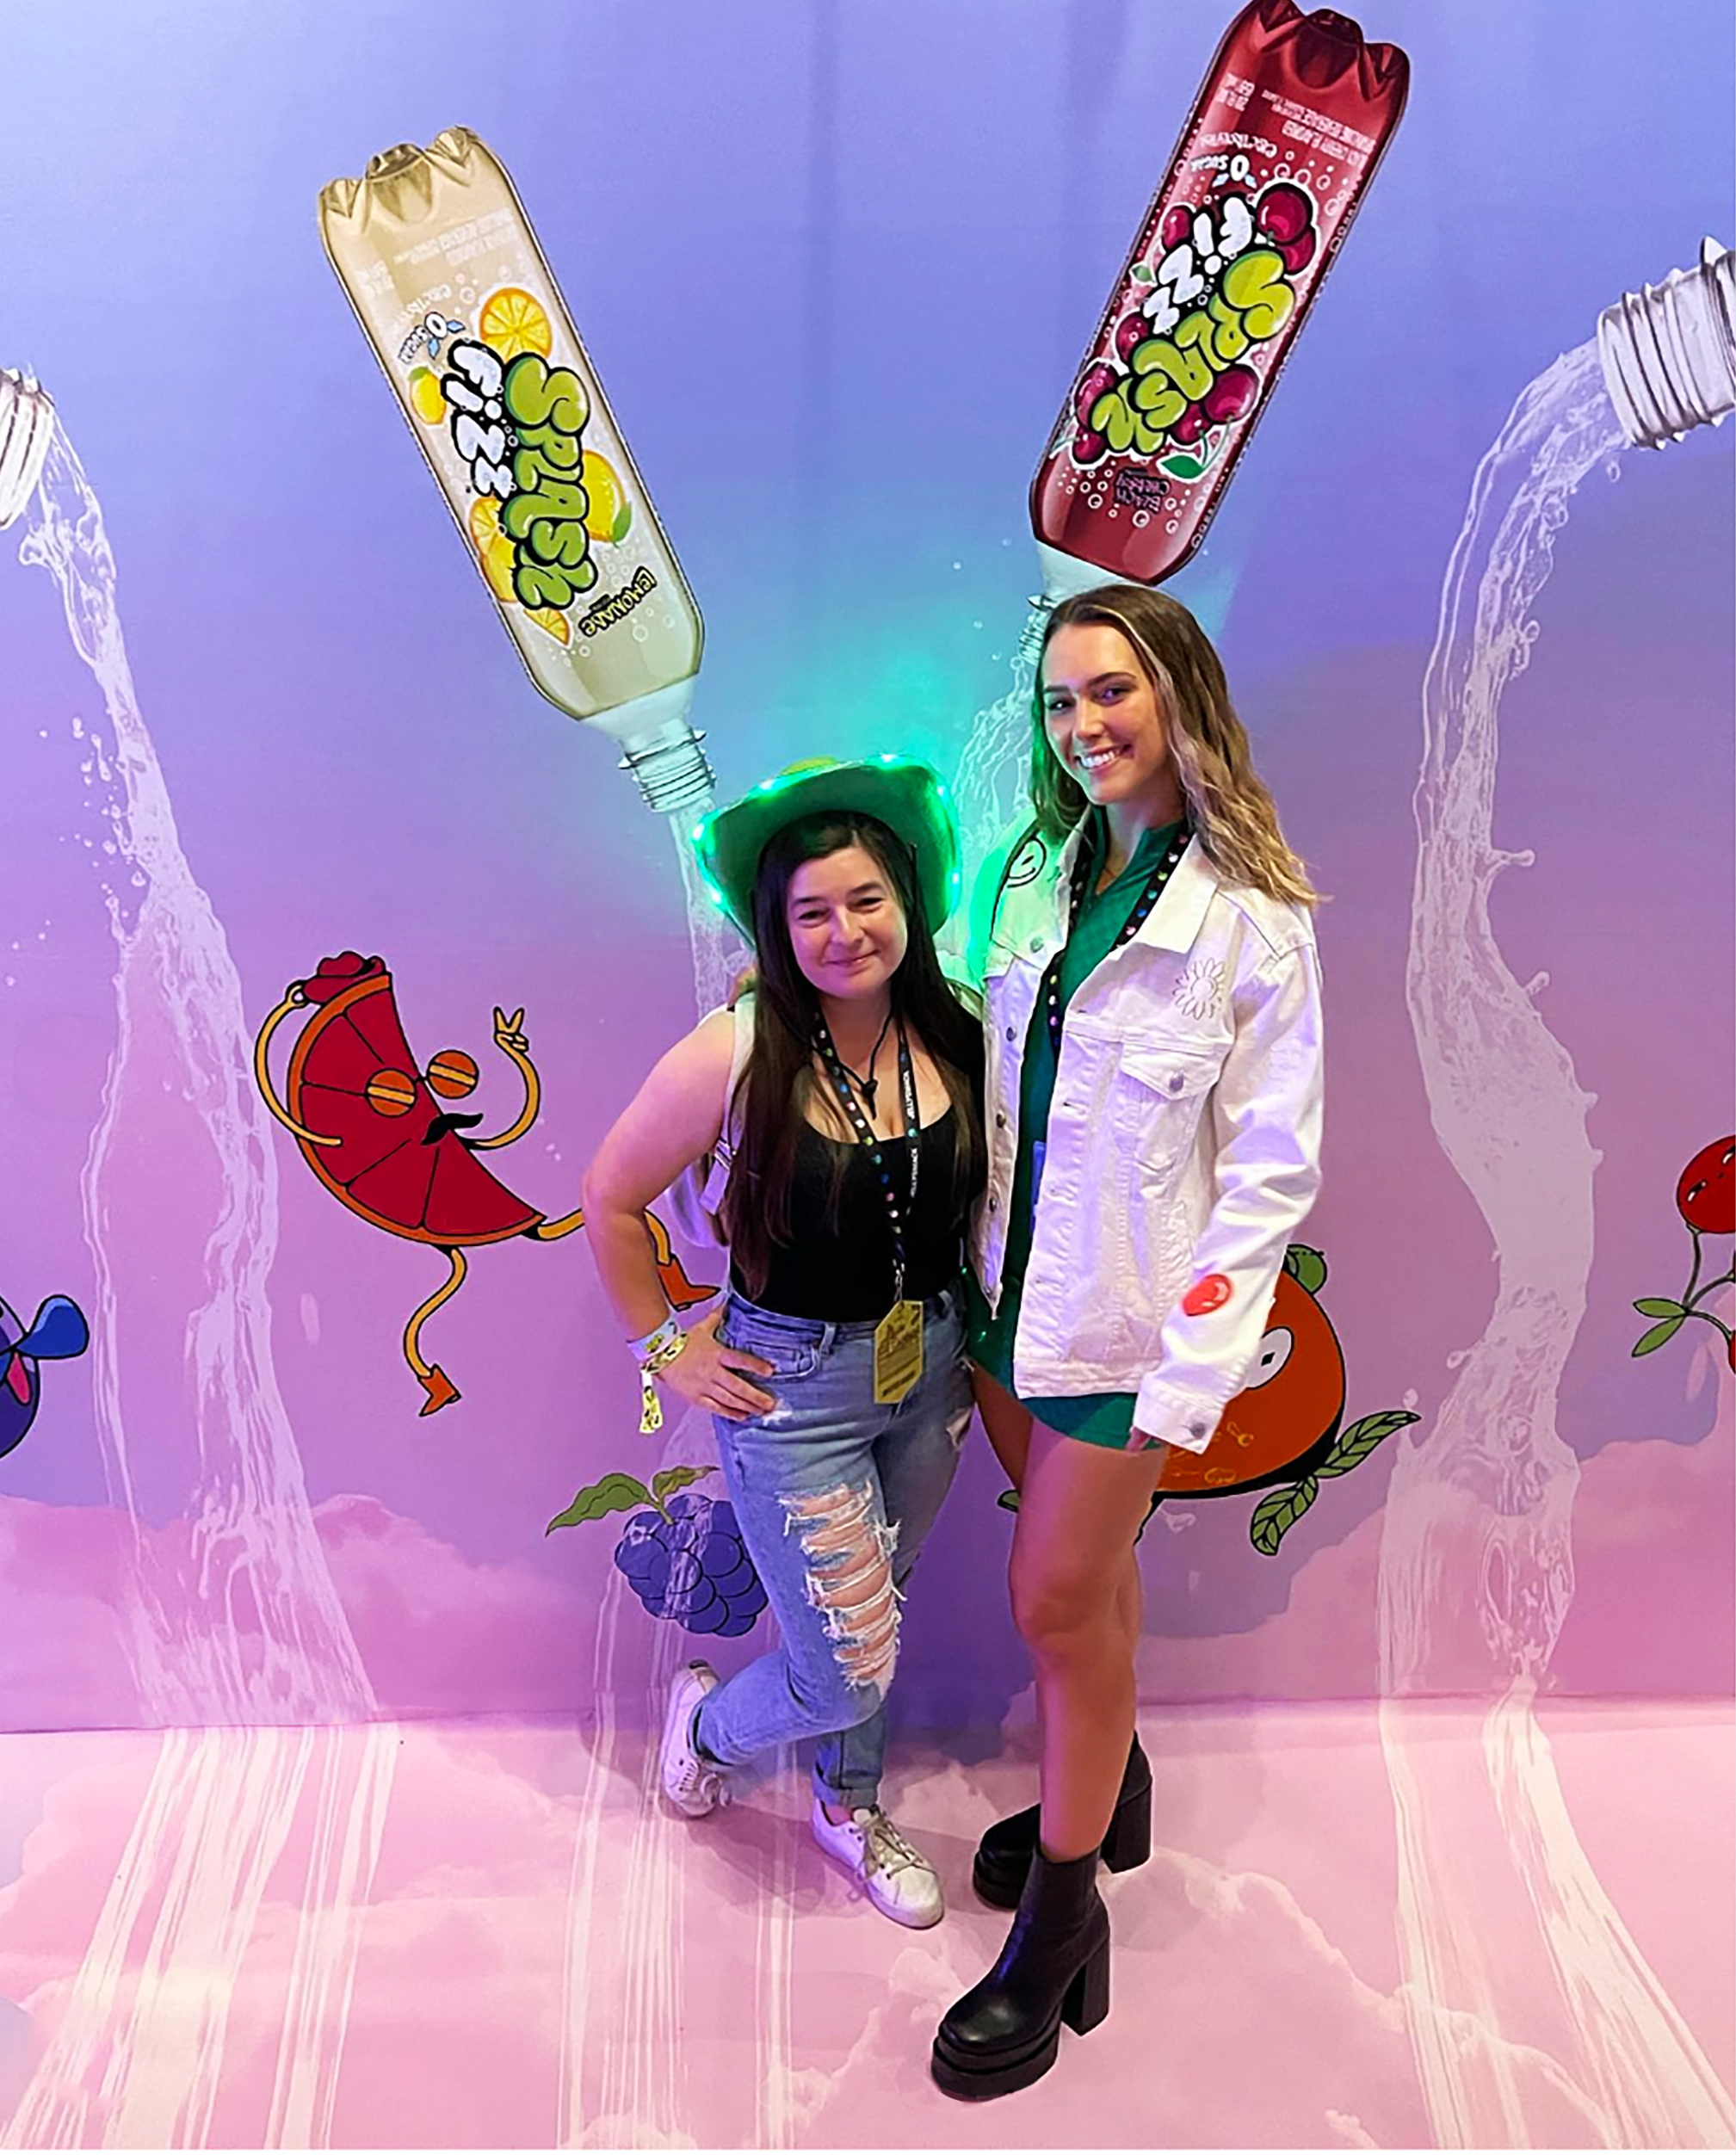 Two friends posing in front of a backdrop of fruit characters and cascading Splash water.